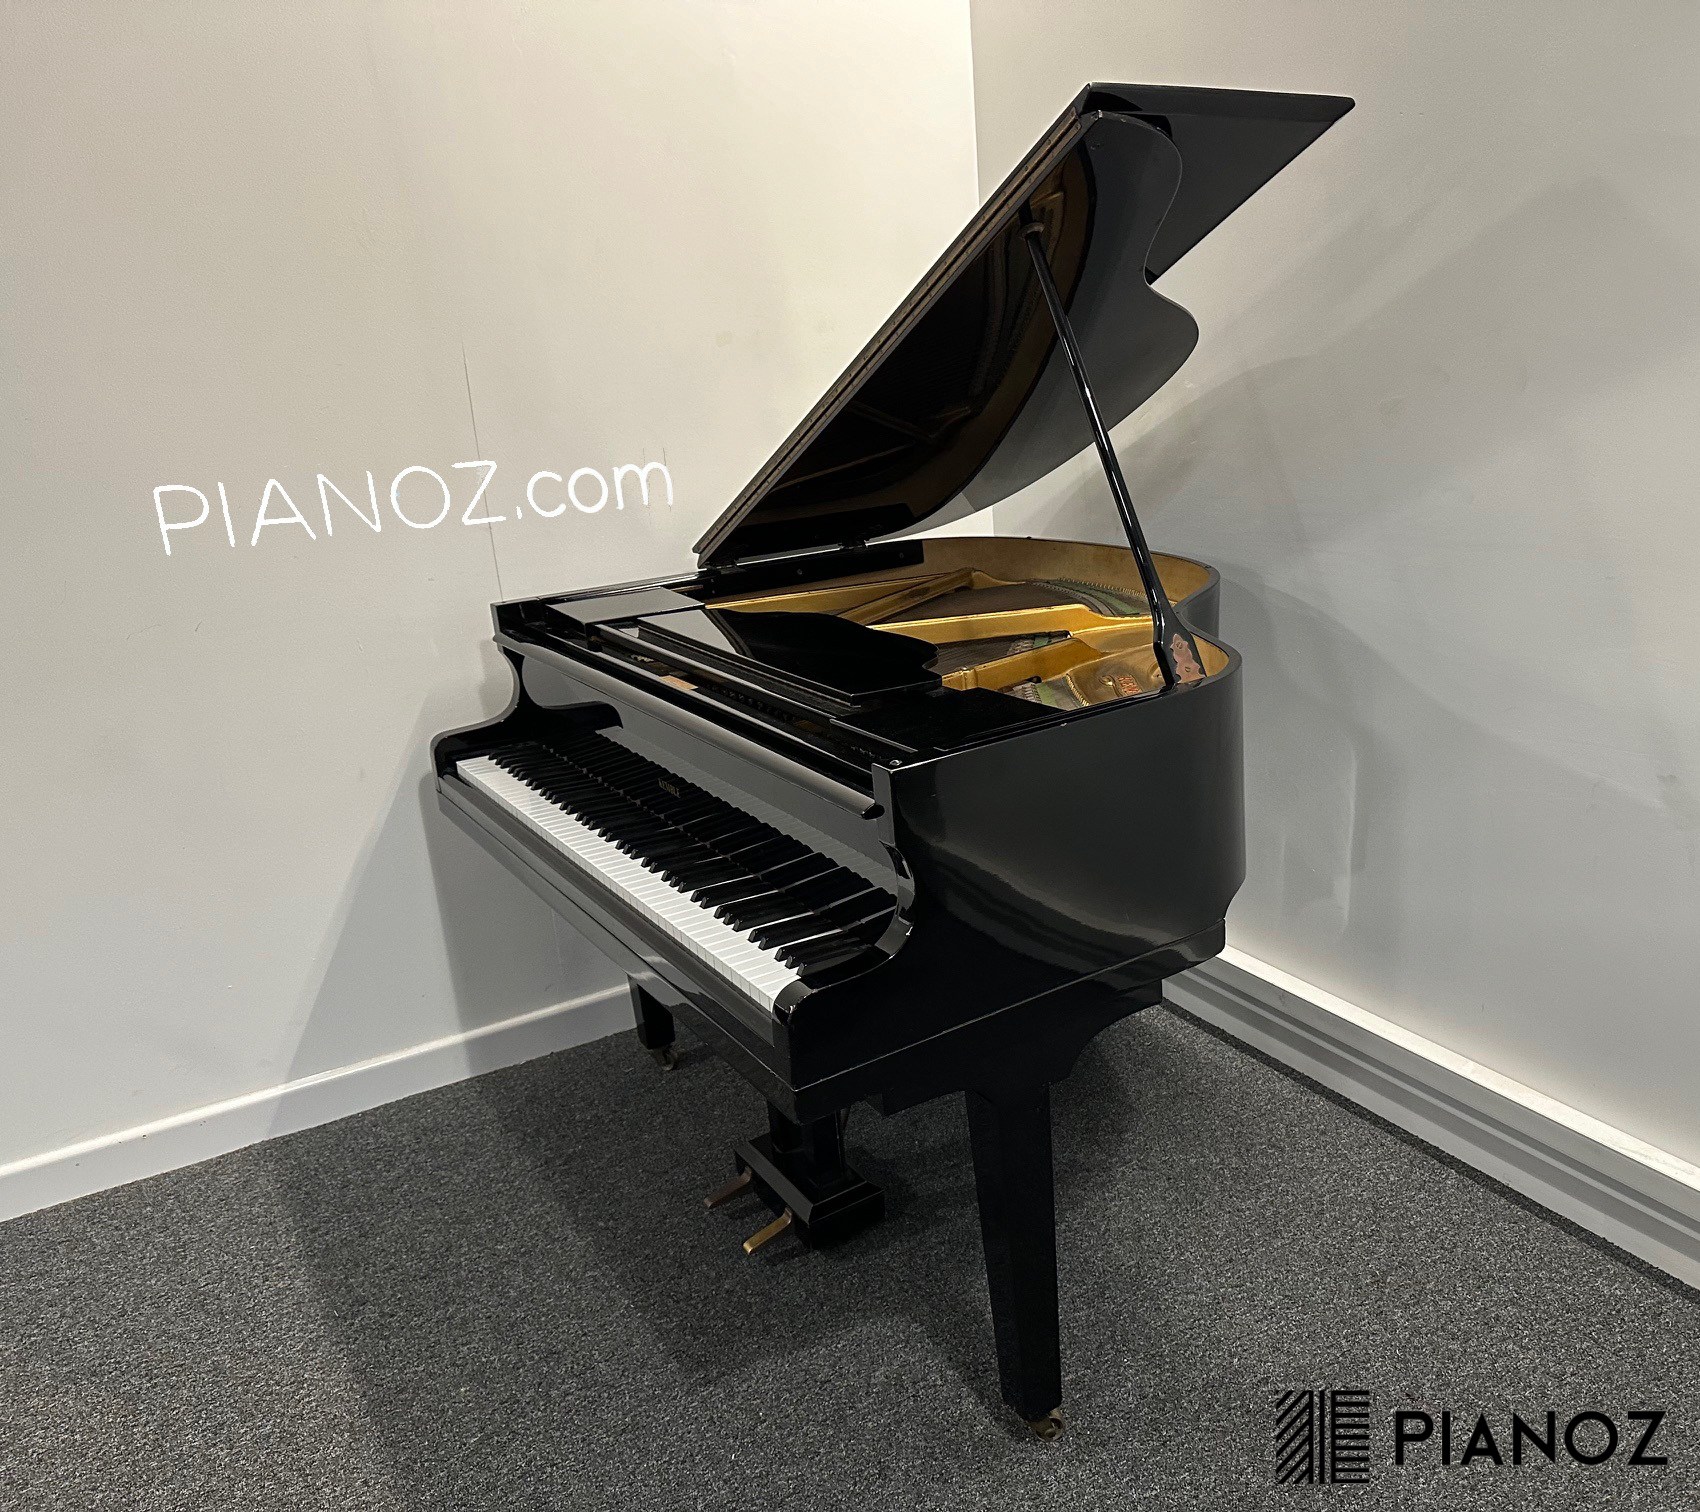 Kemble Black High Gloss Baby Grand Piano piano for sale in UK